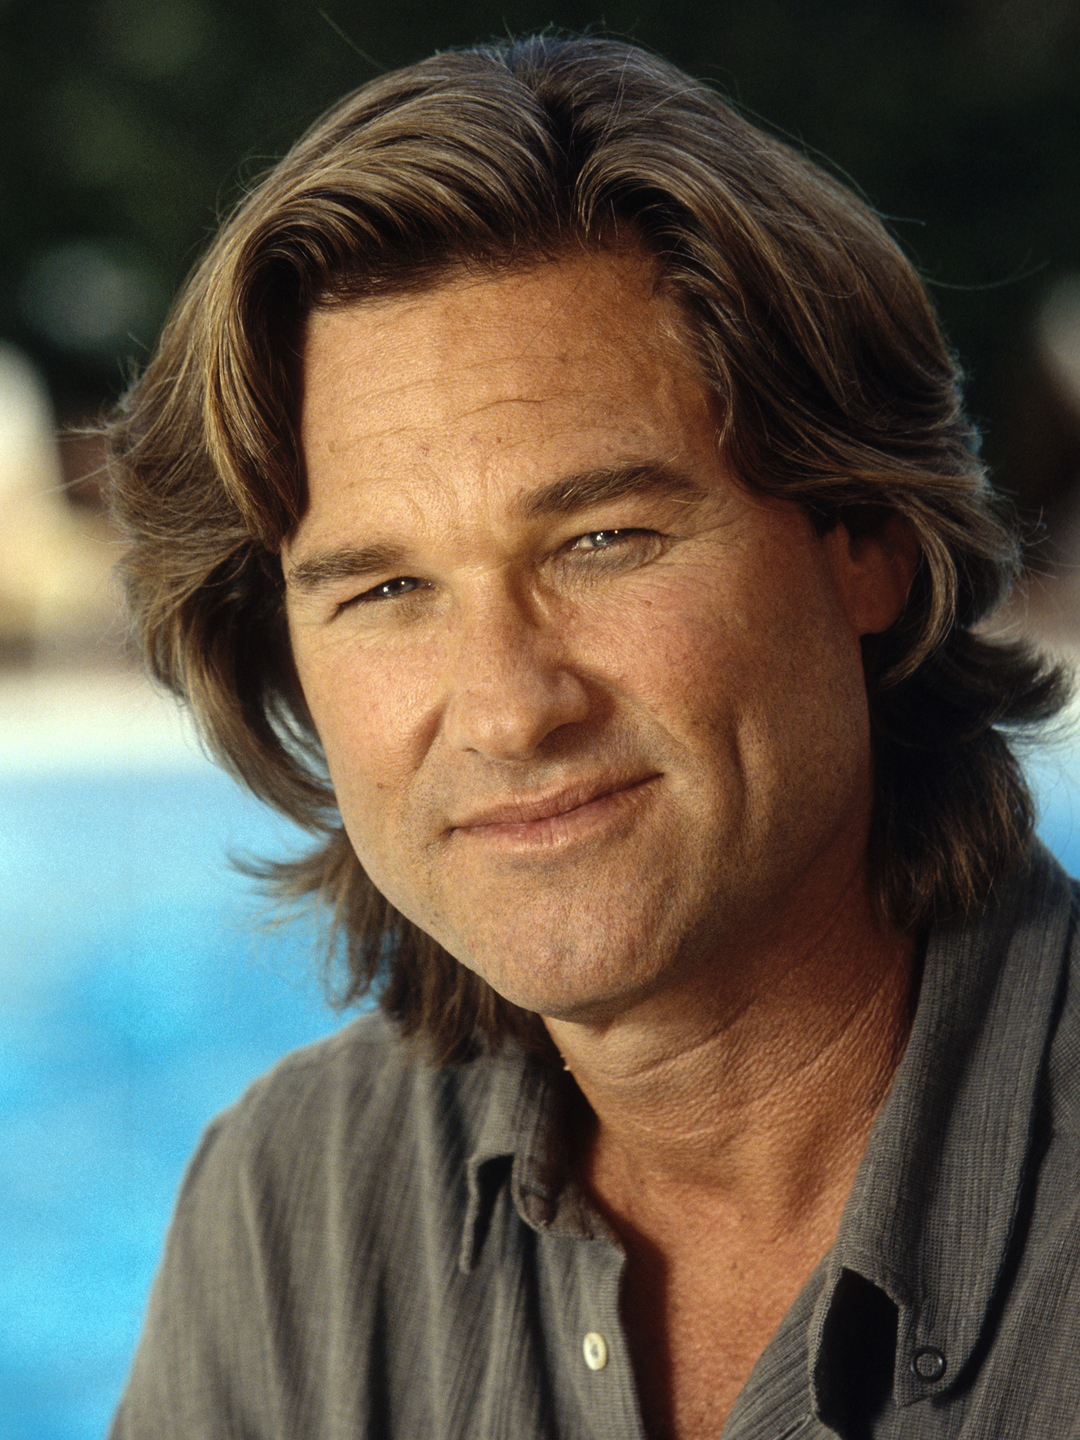 Kurt Russell in real life